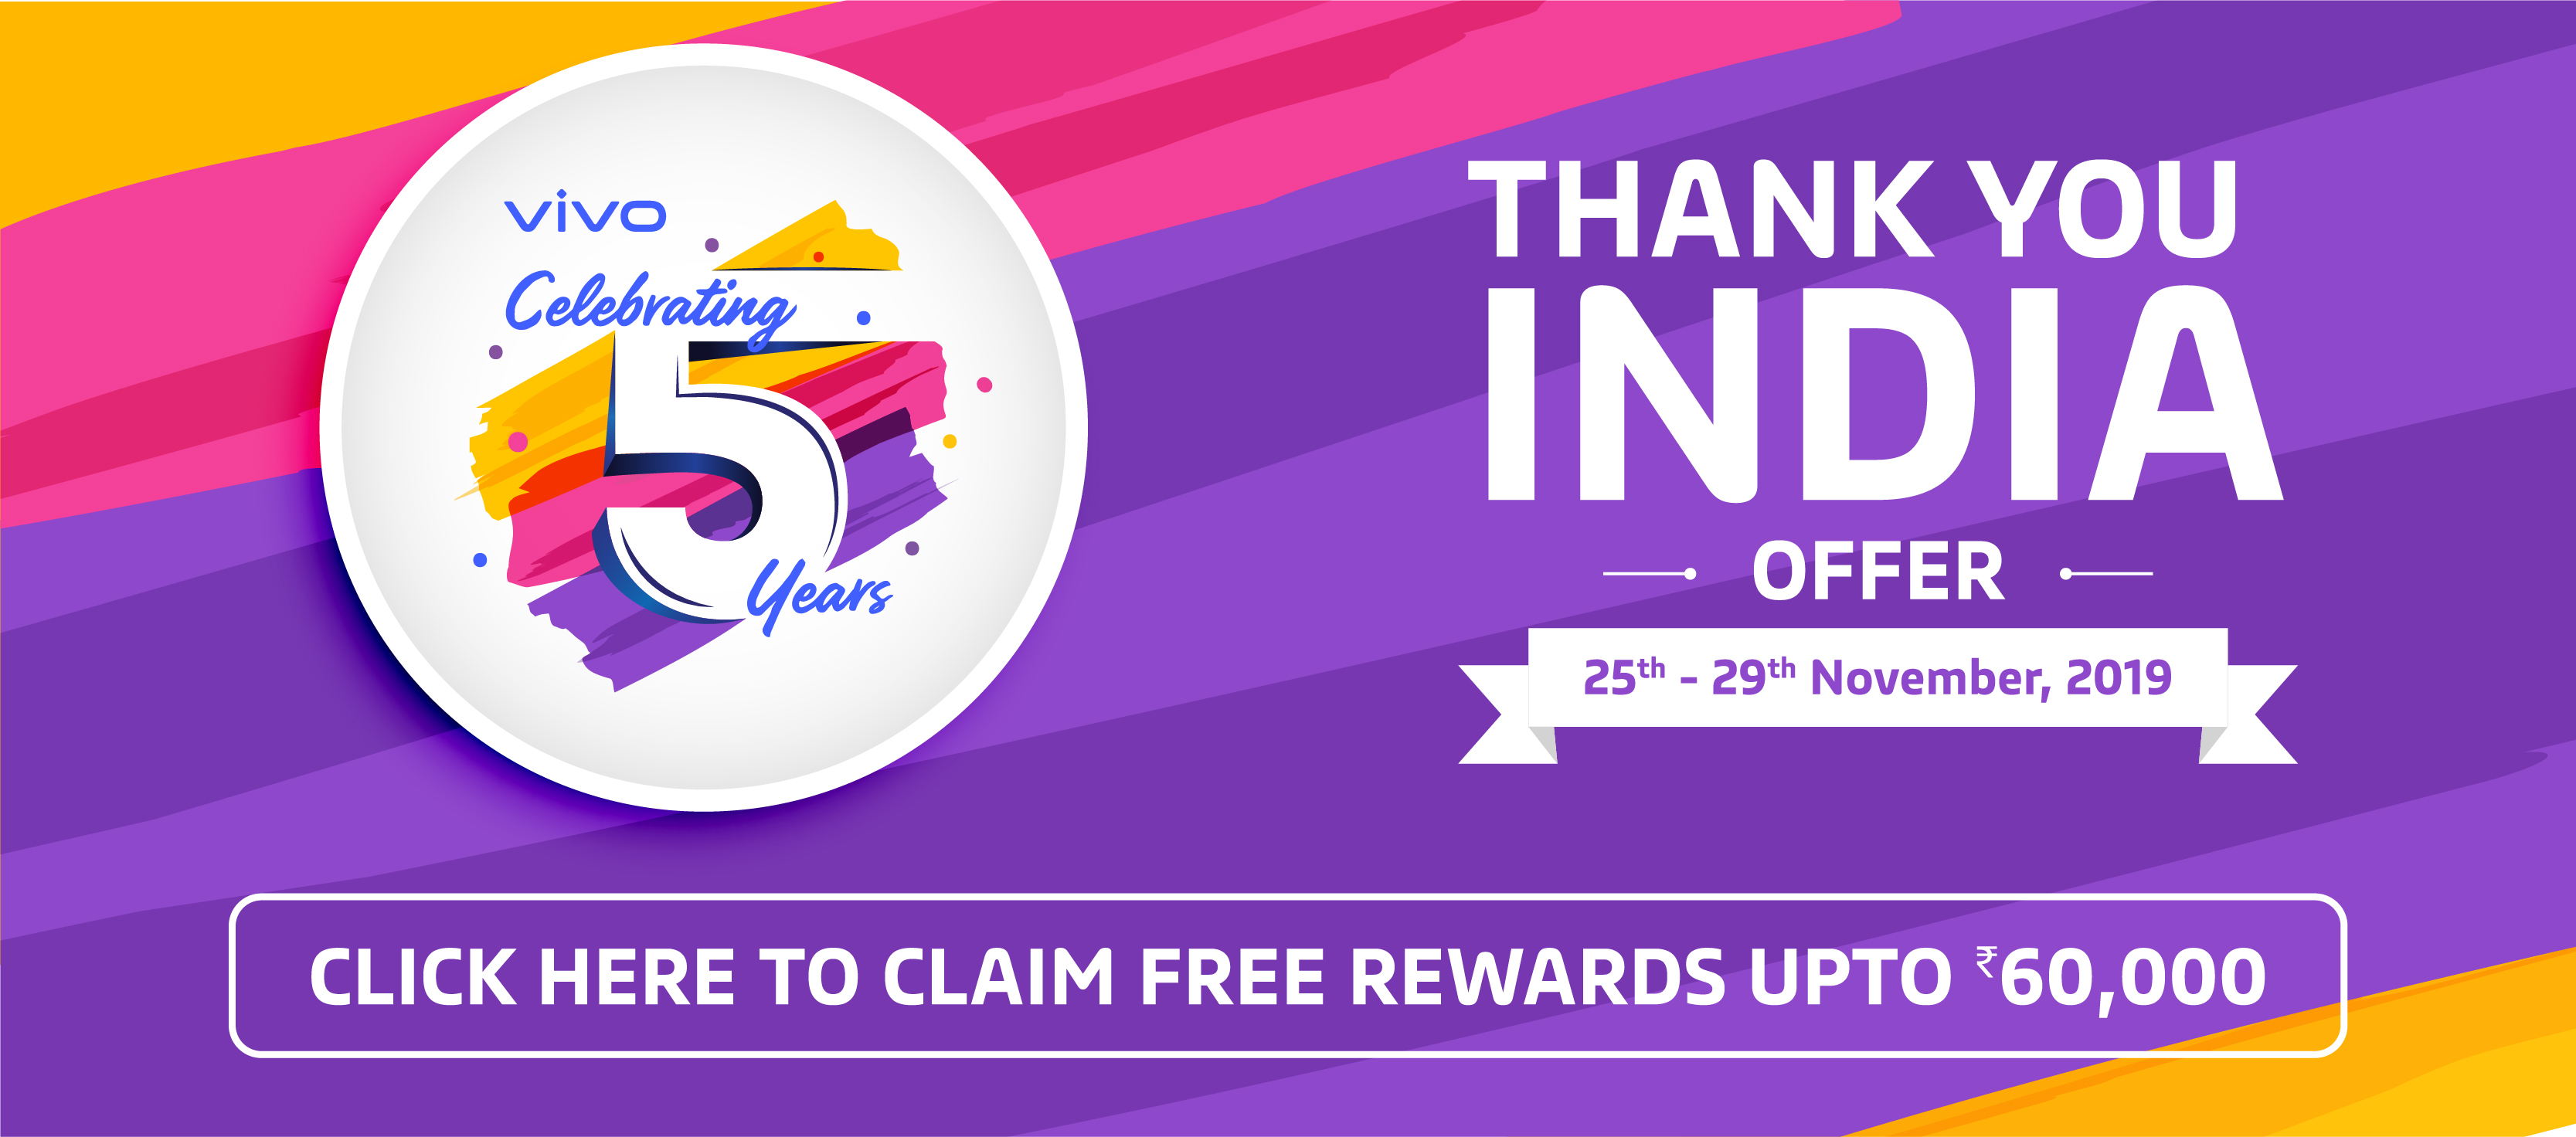 vivo Brings "Thank You India Offer" as Part of 5 Year Celebration - Get Rewards Worth INR 60,000